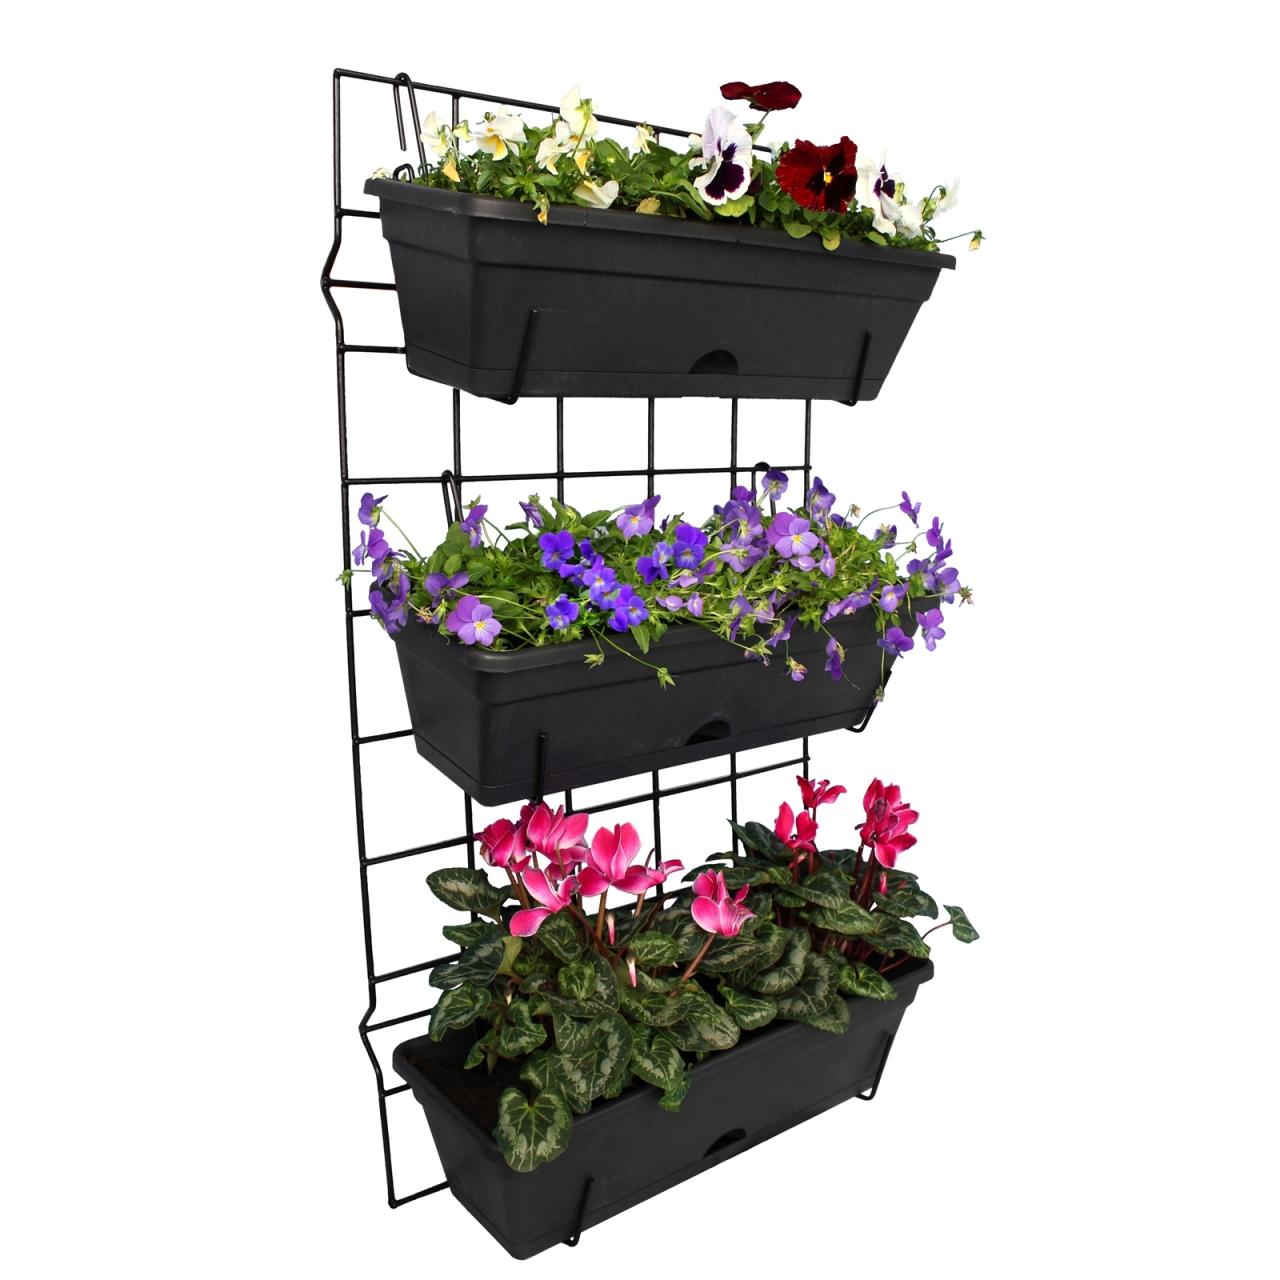 Hanging Plants Indoor | Discover Endless Styling Possibilities with Indoor Hanging Pots from Bunnings